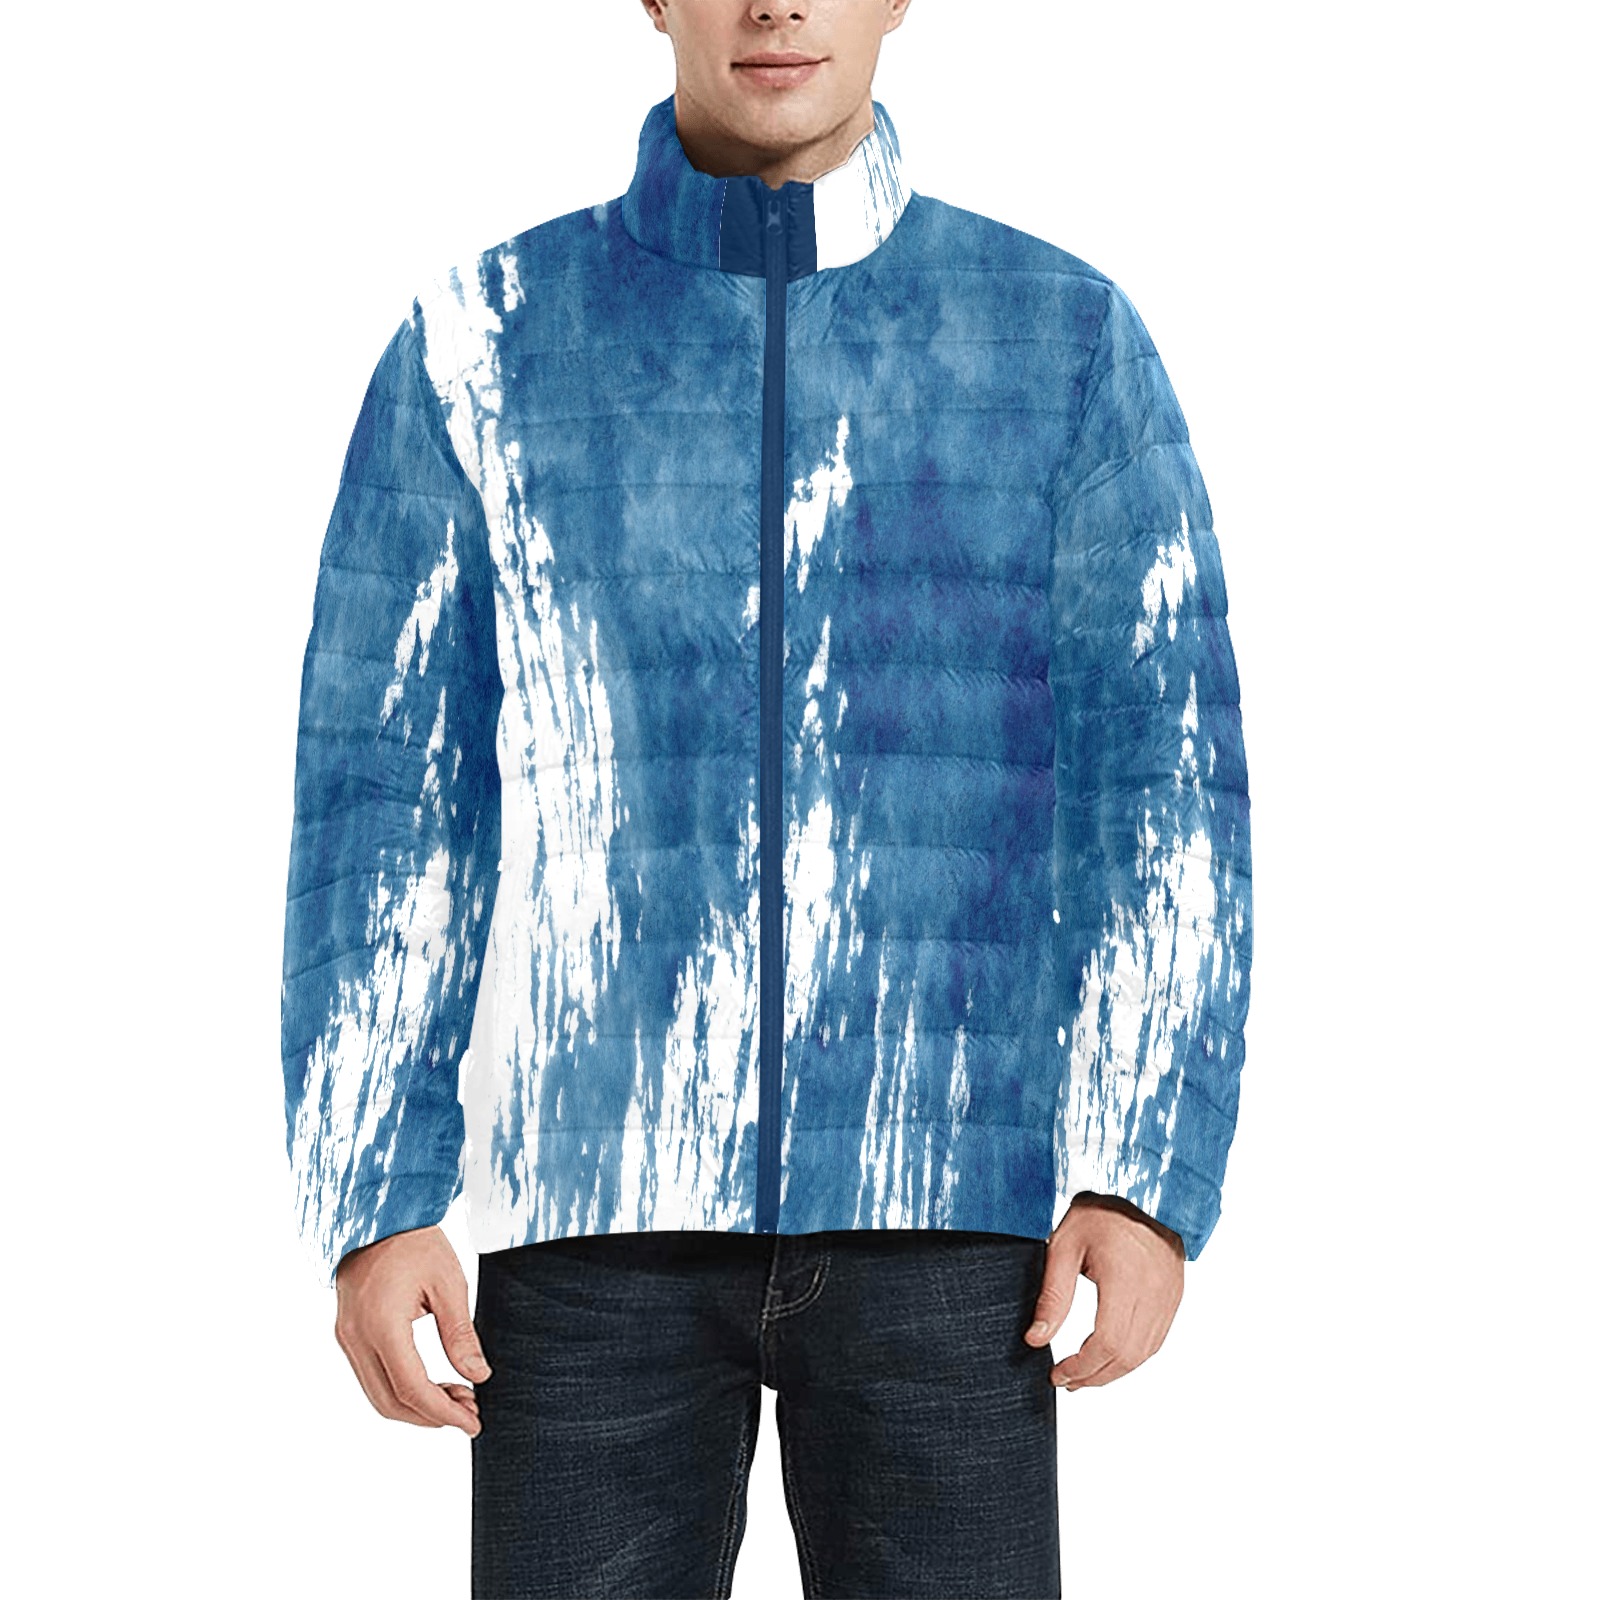 Blue and White Abstract Jacket Men's Stand Collar Padded Jacket (Model H41)